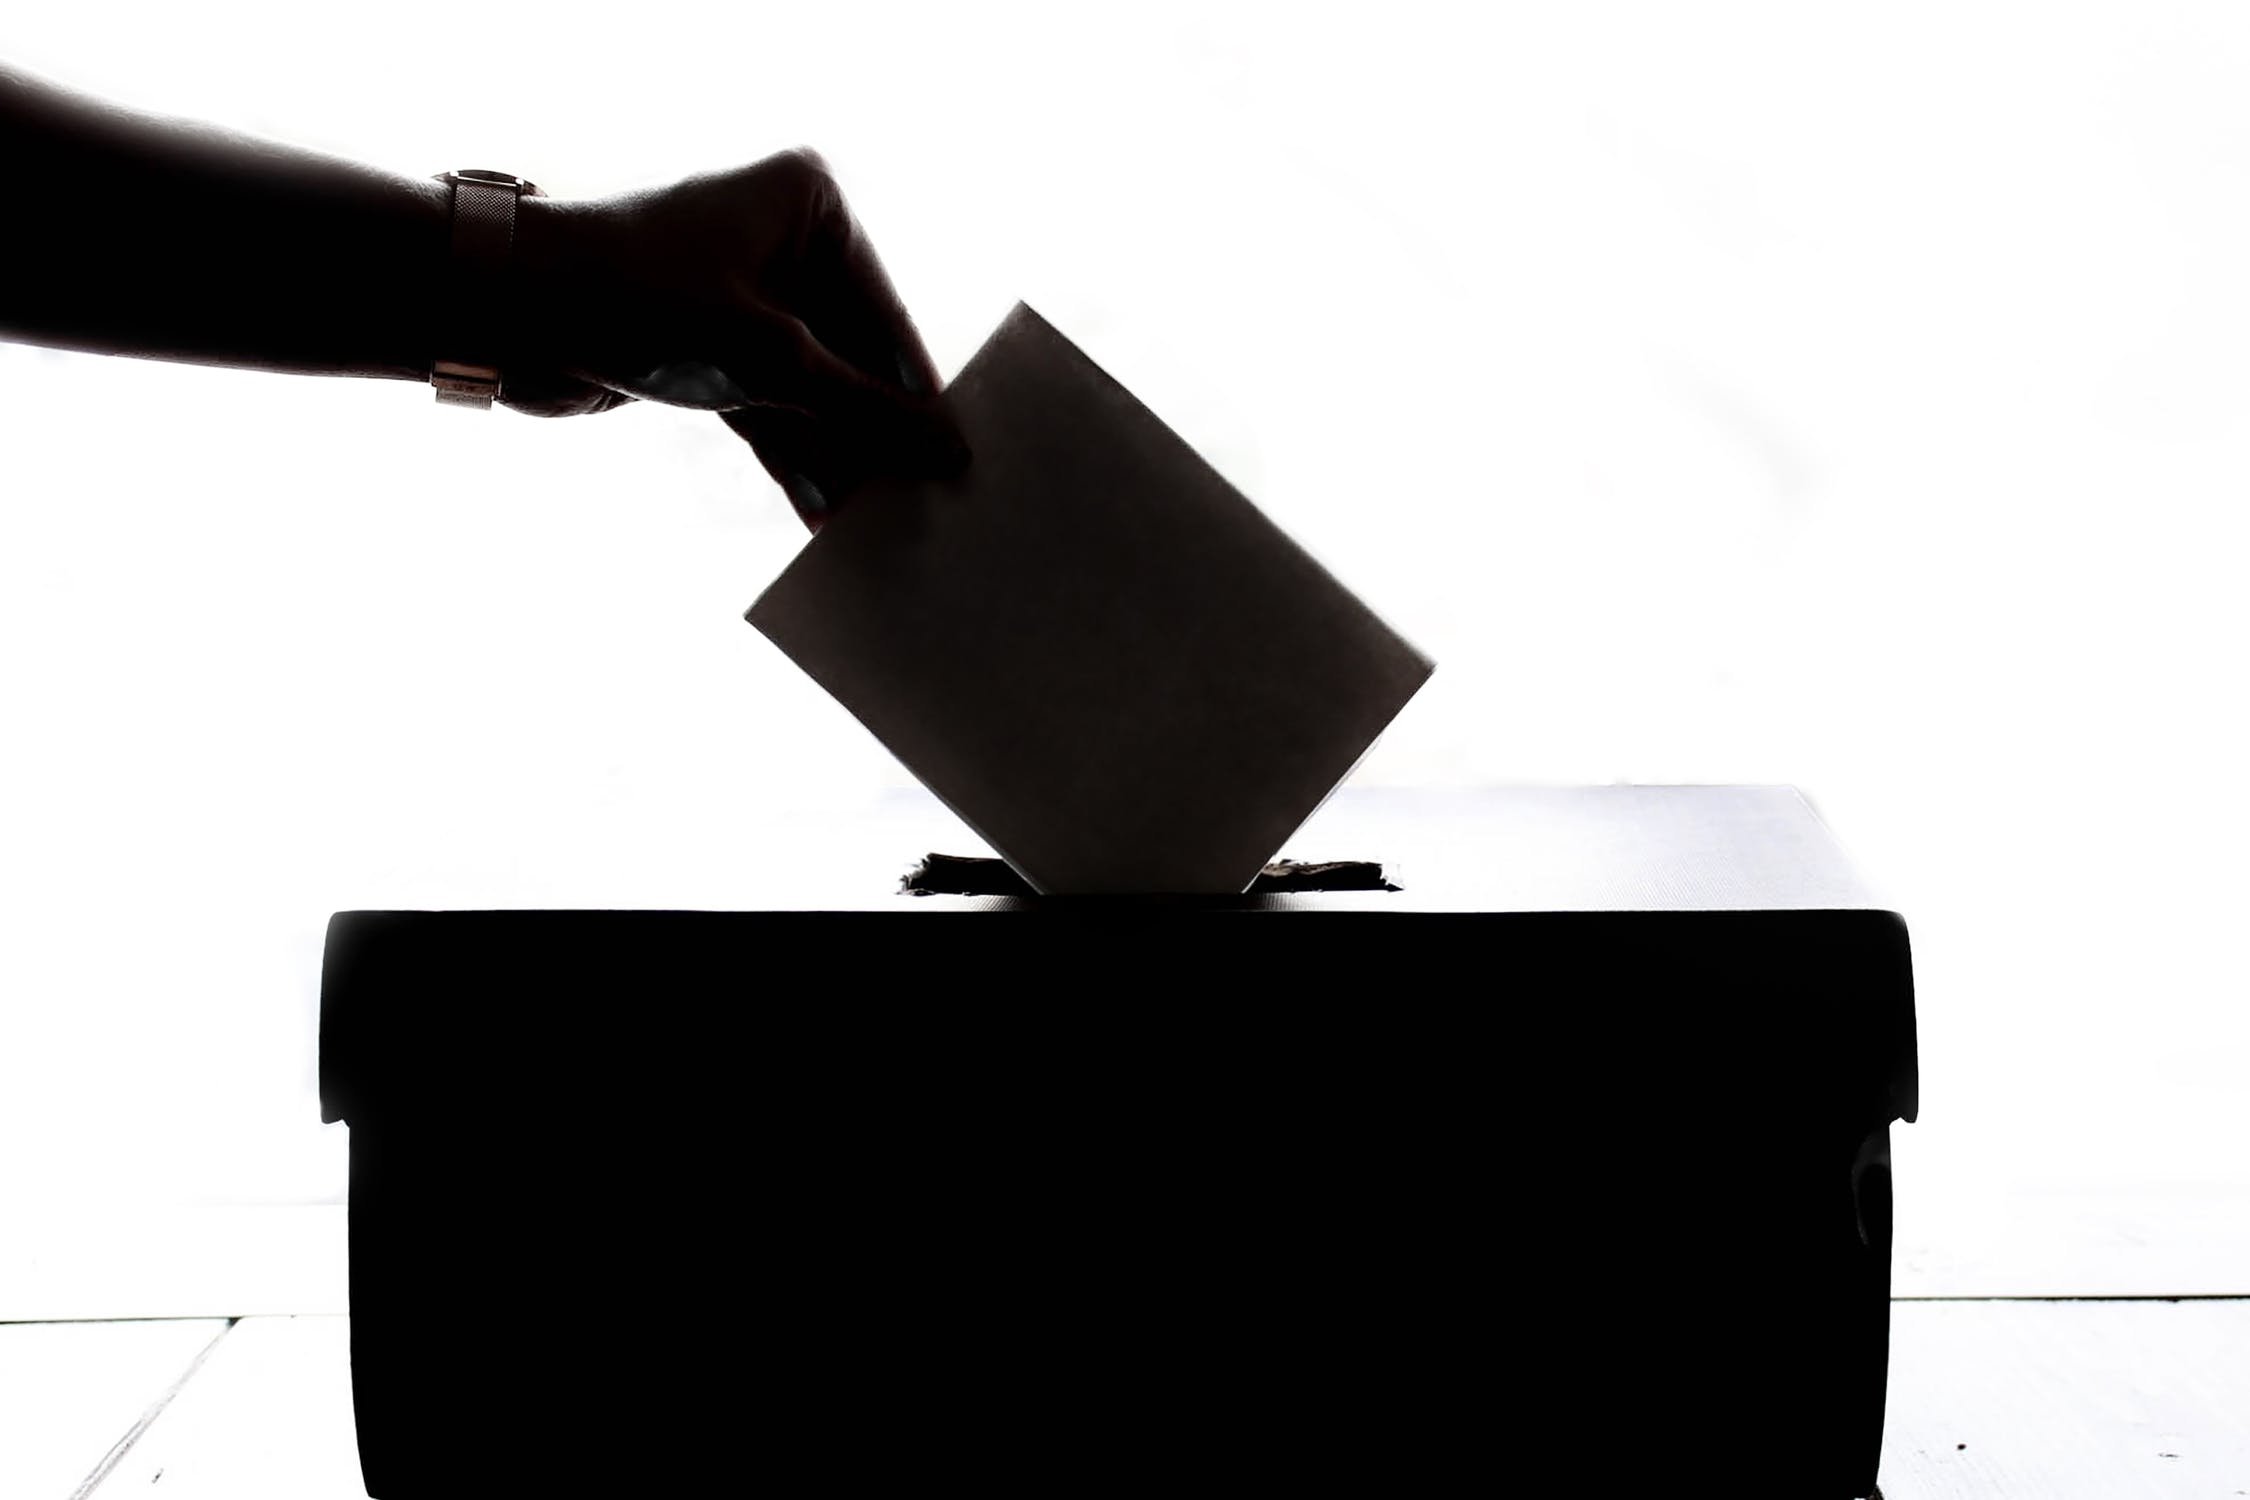 A silhouette photograph of a hand posting a note into a ballot box.